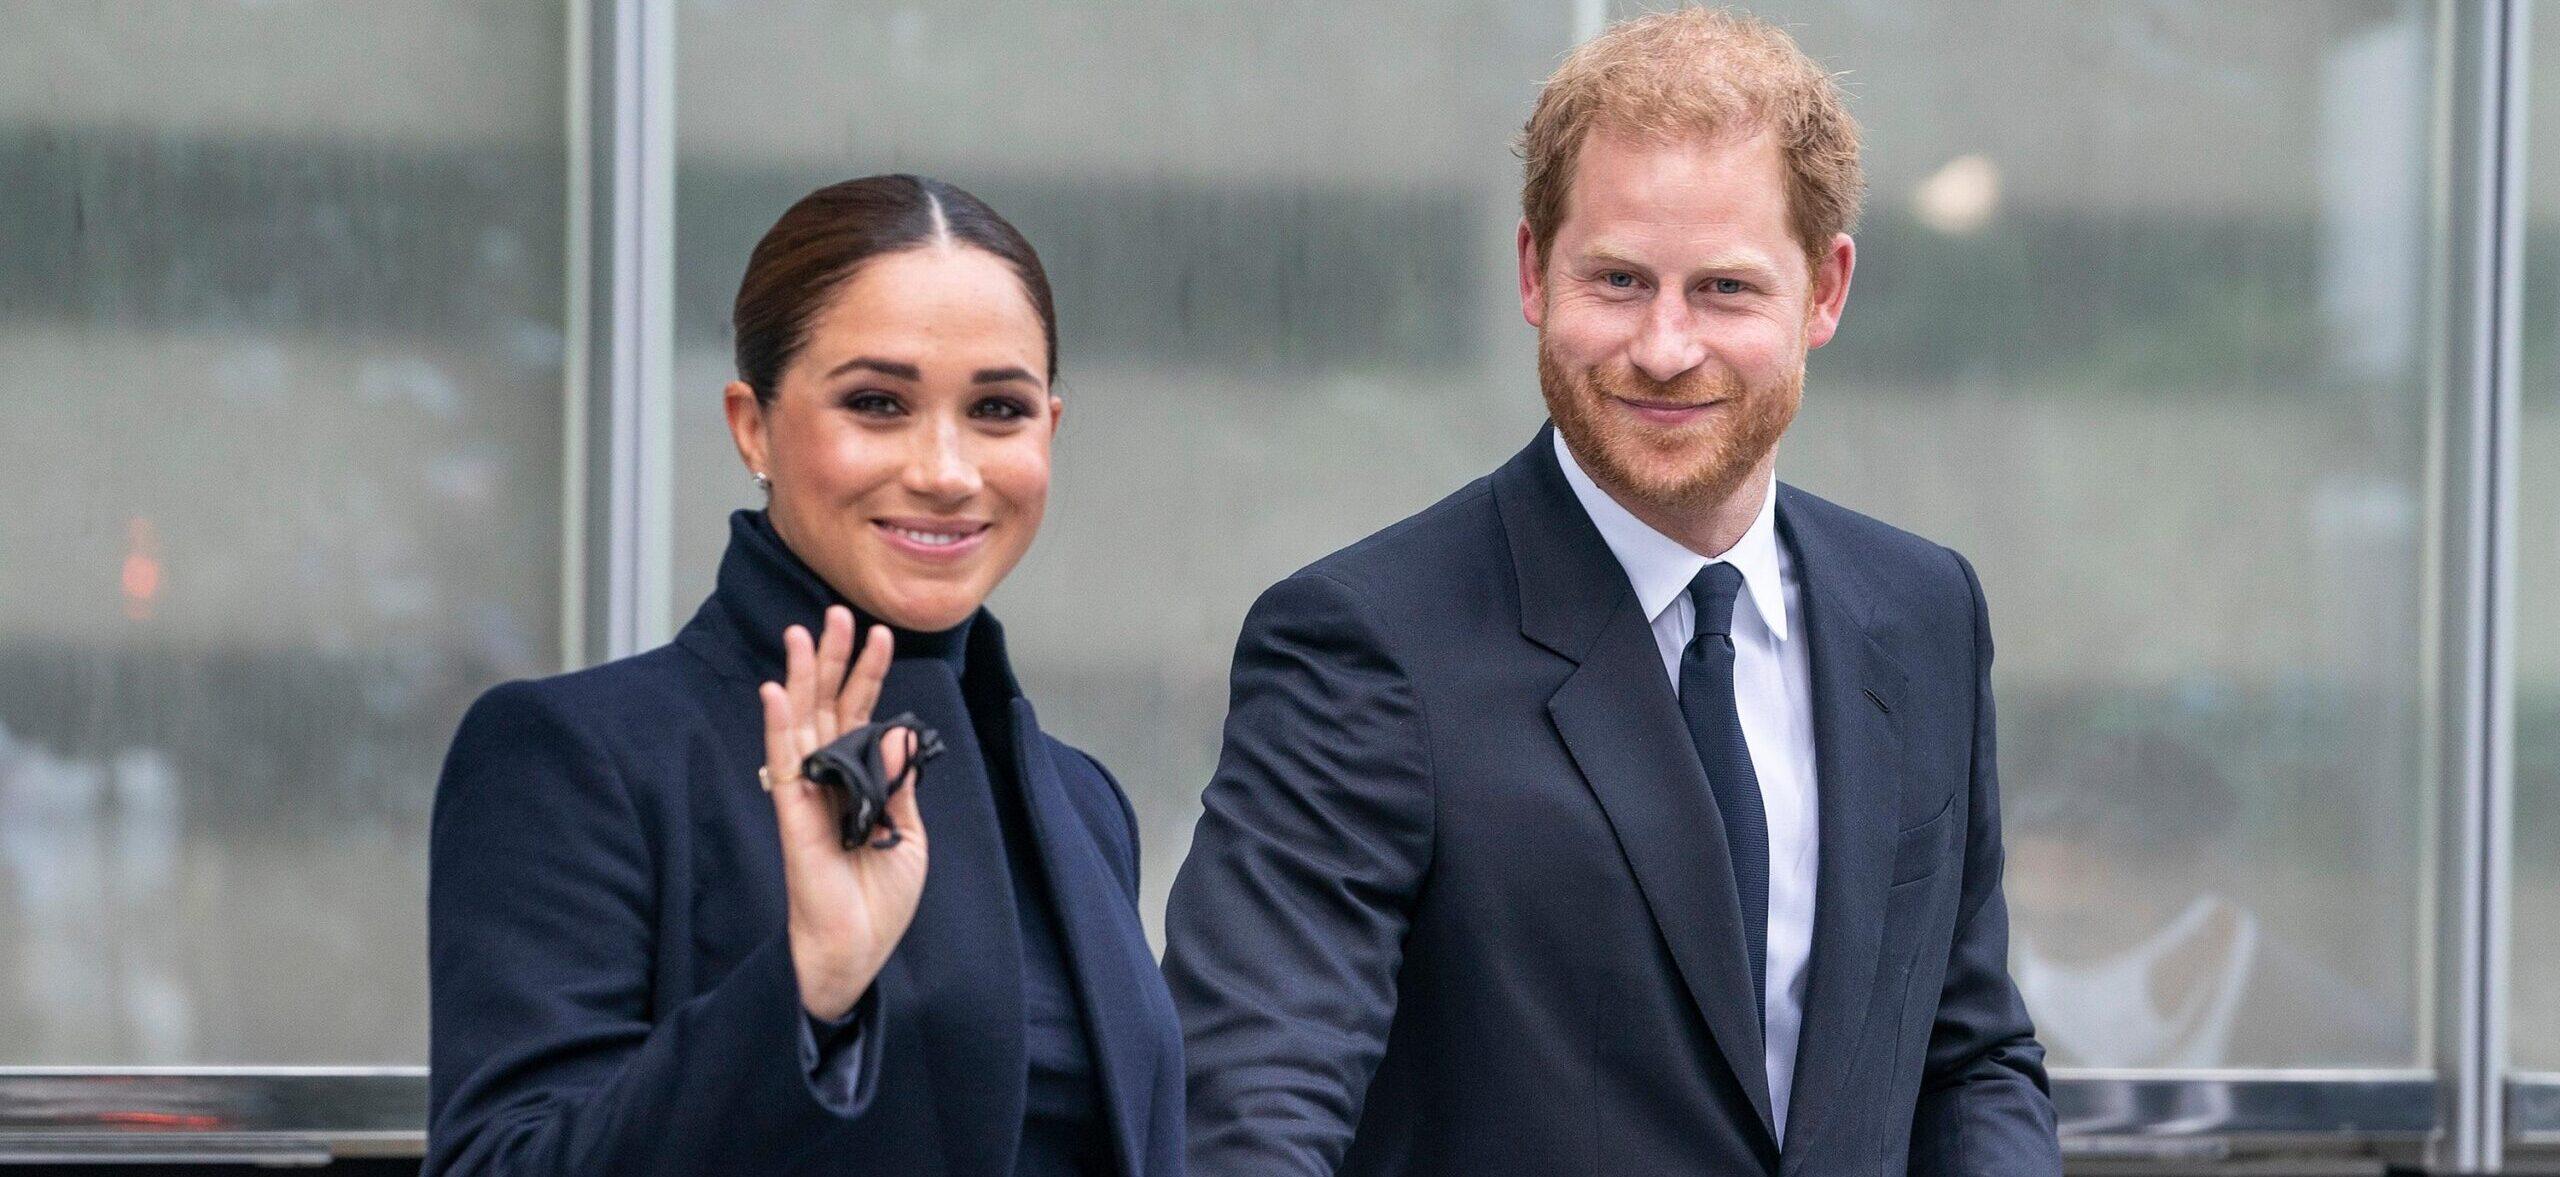 Meghan Markle’s Decision To Avoid UK Visit Slammed As ‘Odd’ As She And Prince Harry Tour Nigeria